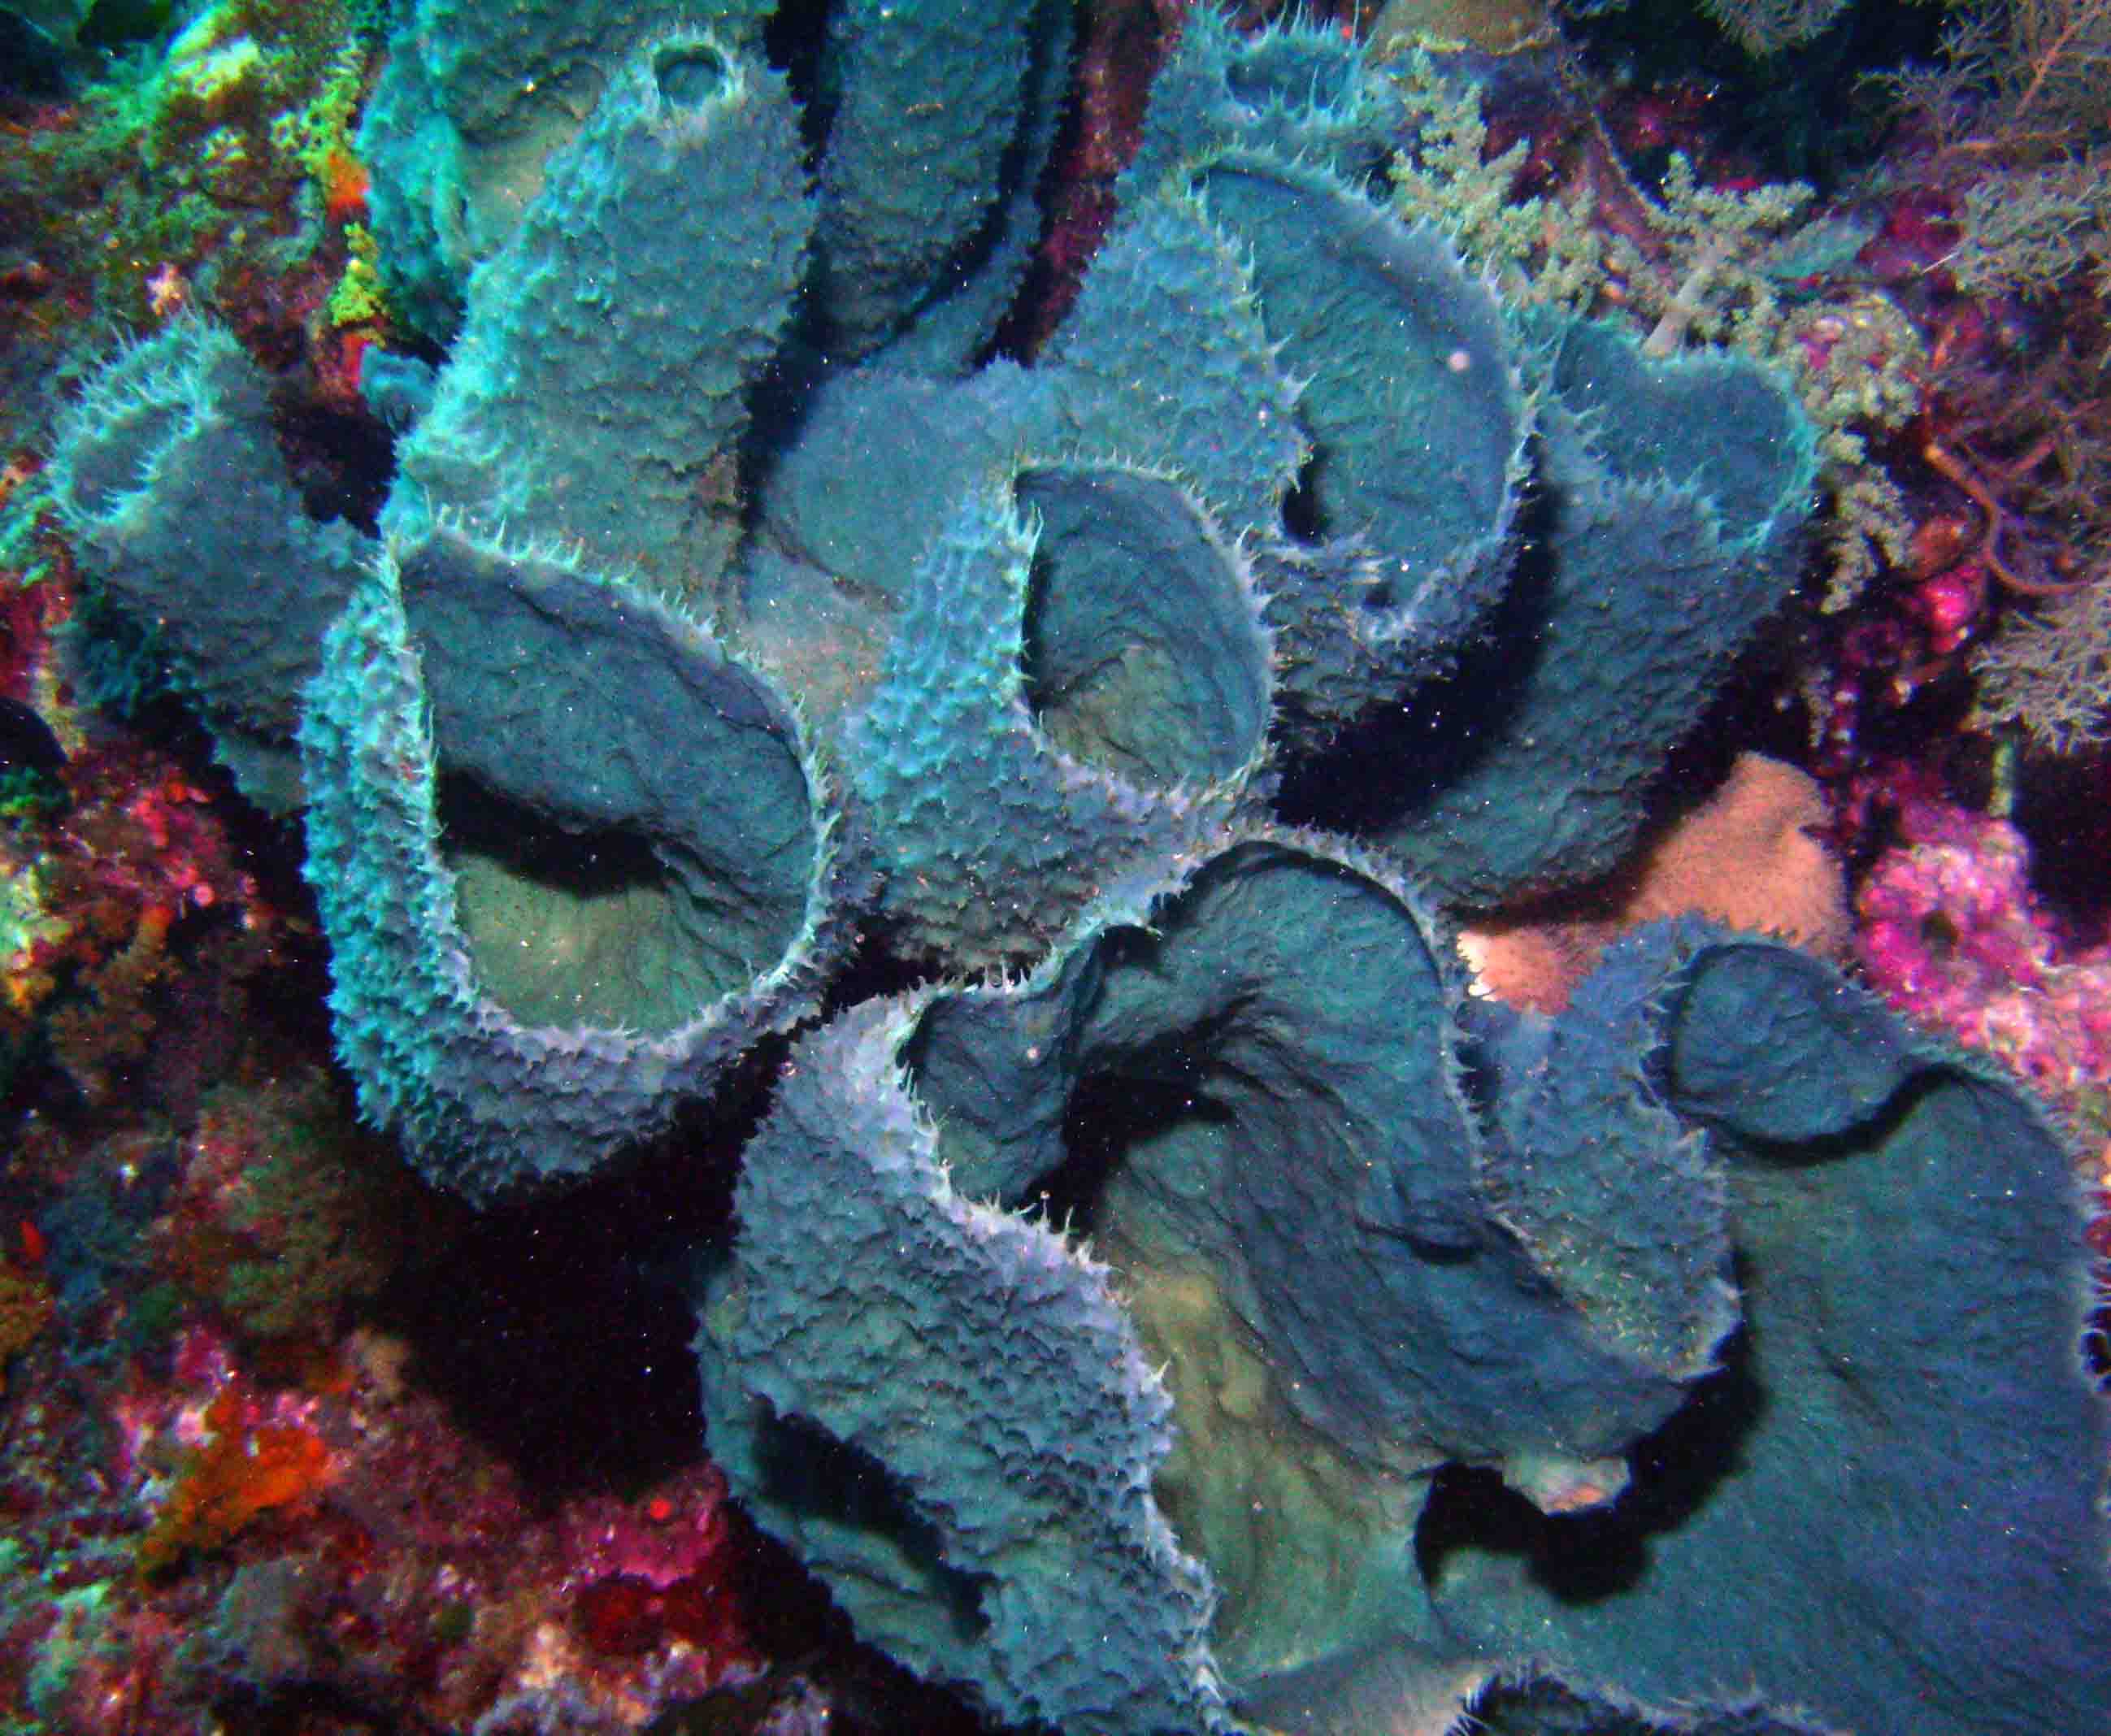 10 Sea Sponges Facts You Didn't Know About - Ocean of Hope